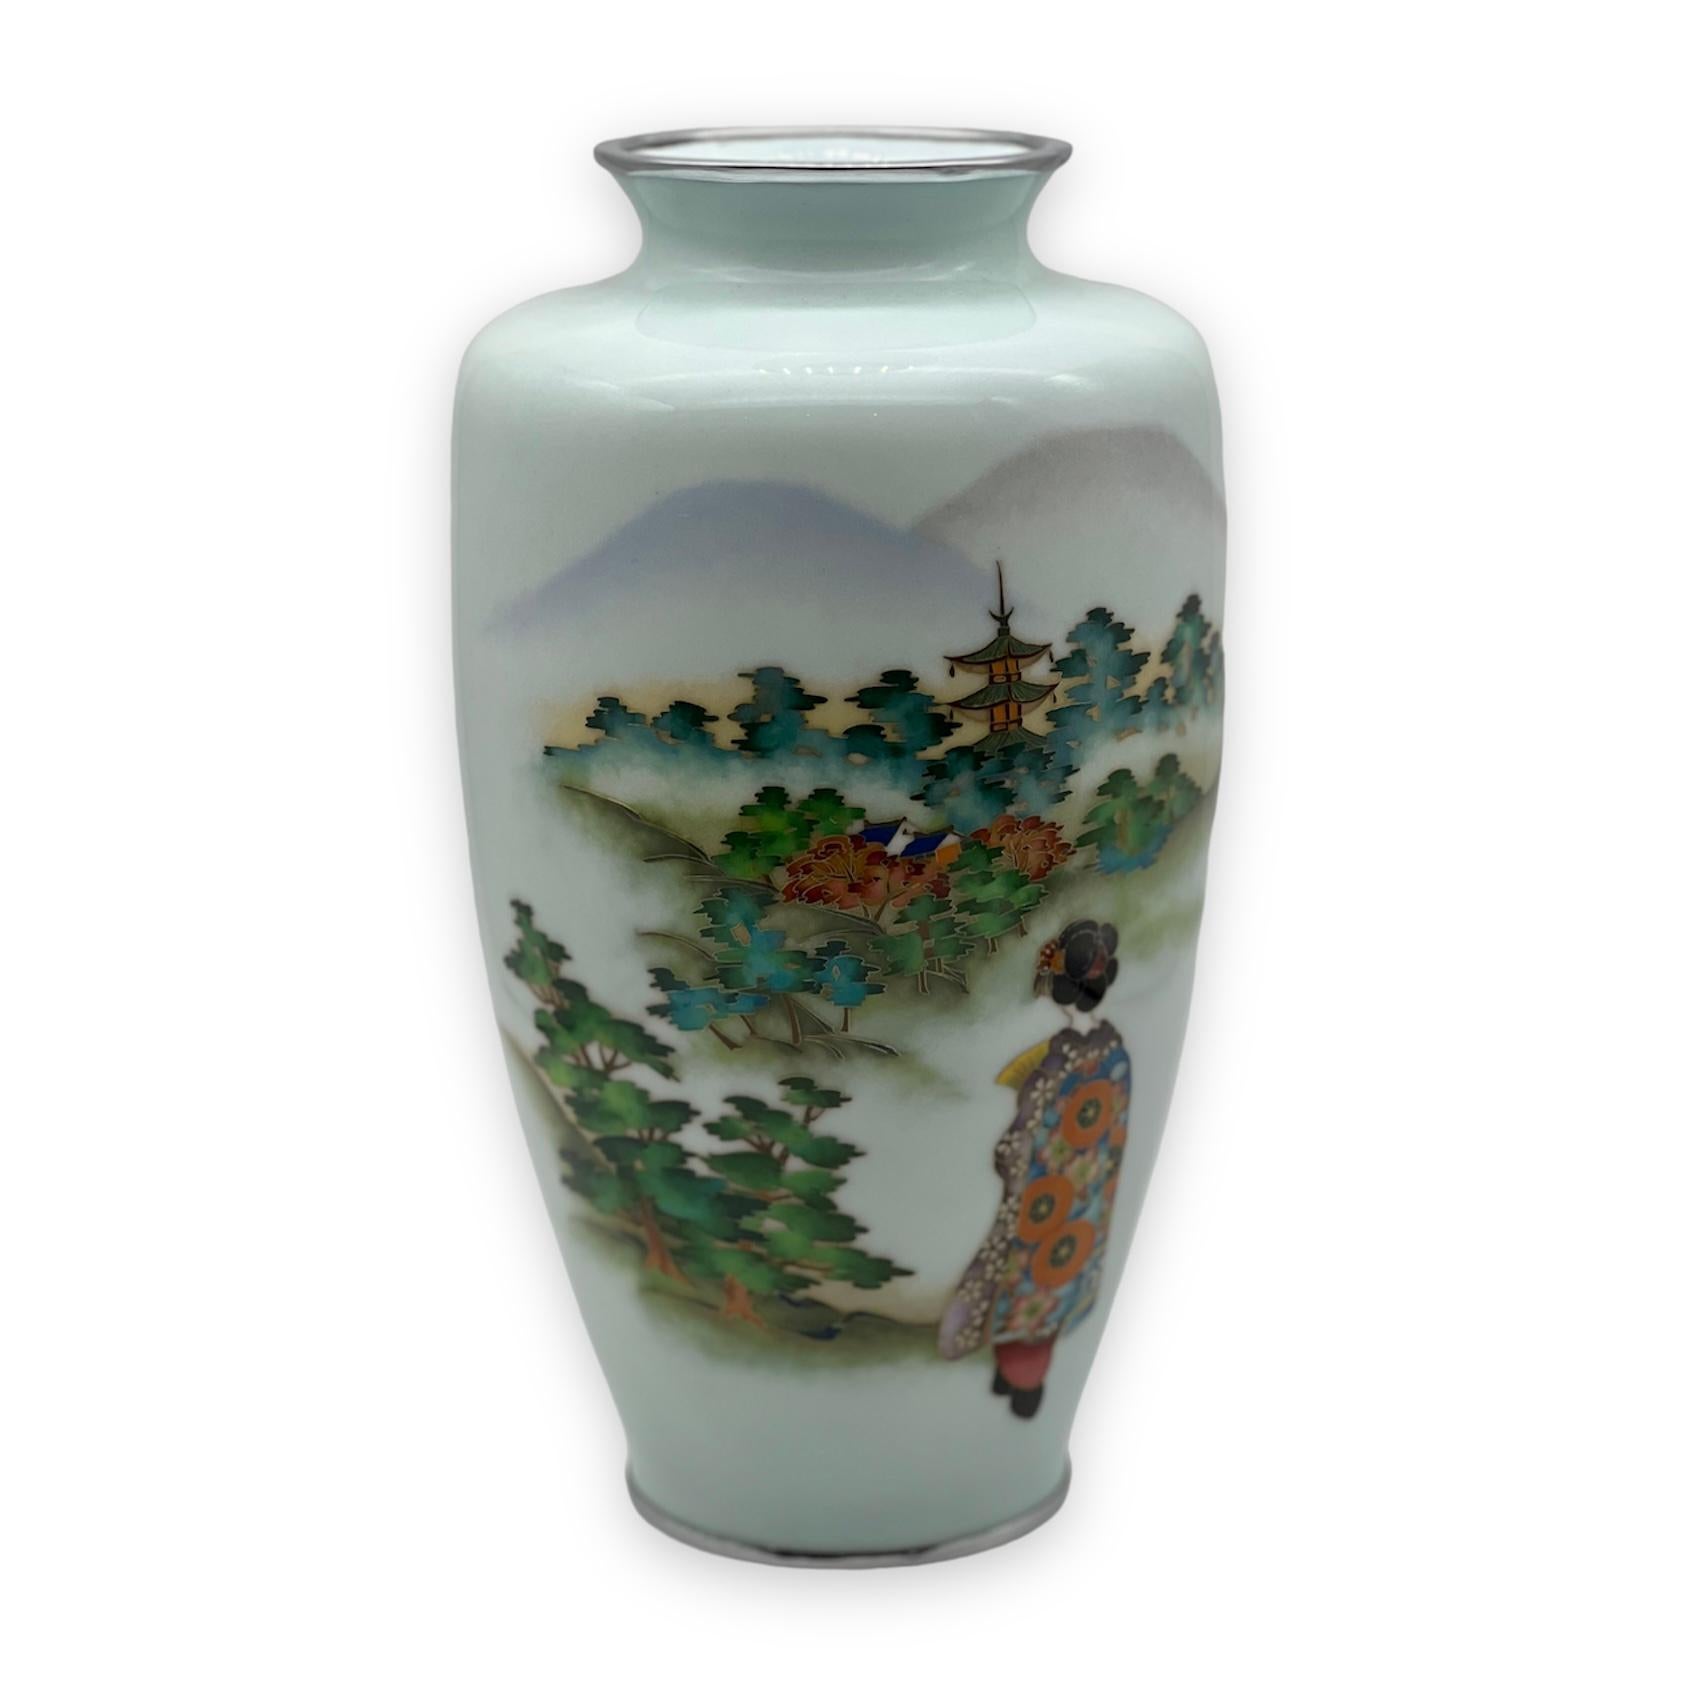 A Large Japanese Cloisonne Enamel vase attributed to Ando Jubei.

Taisho period (1912 – 1926)

A large baluster Cloisonne-Enamel vase worked in musen and silver wire of varying gauge and decorated with a Japanese Lady in colorful traditional dress